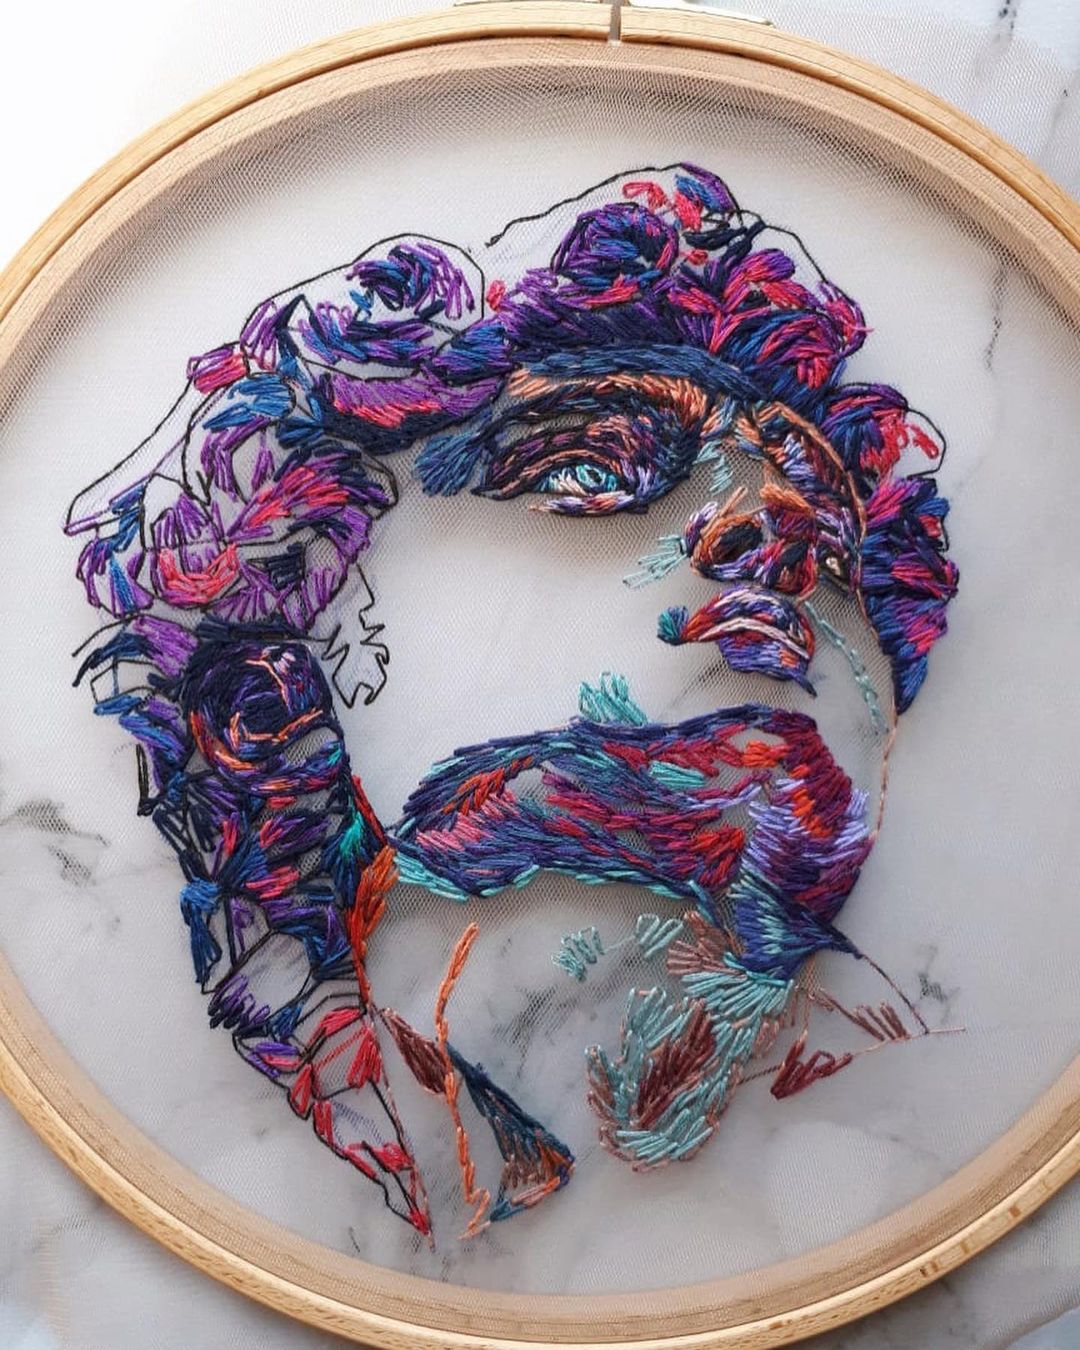 Tulle Embroidery Art by Kathrin Marchenko